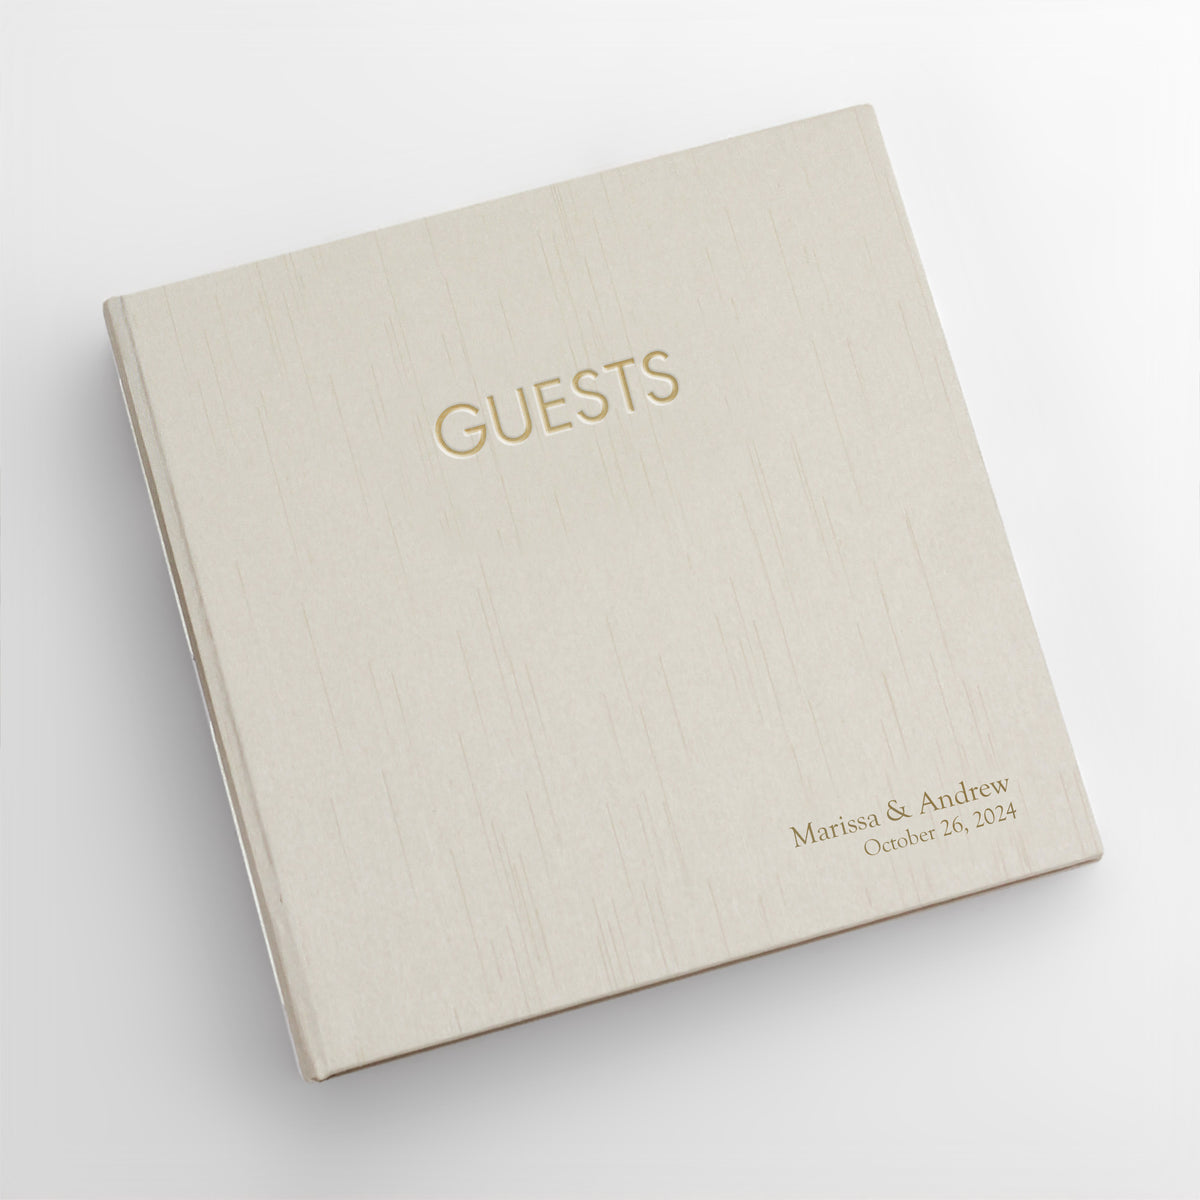 Event Guestbook Embossed with “Guests” with Champagne Silk Cover